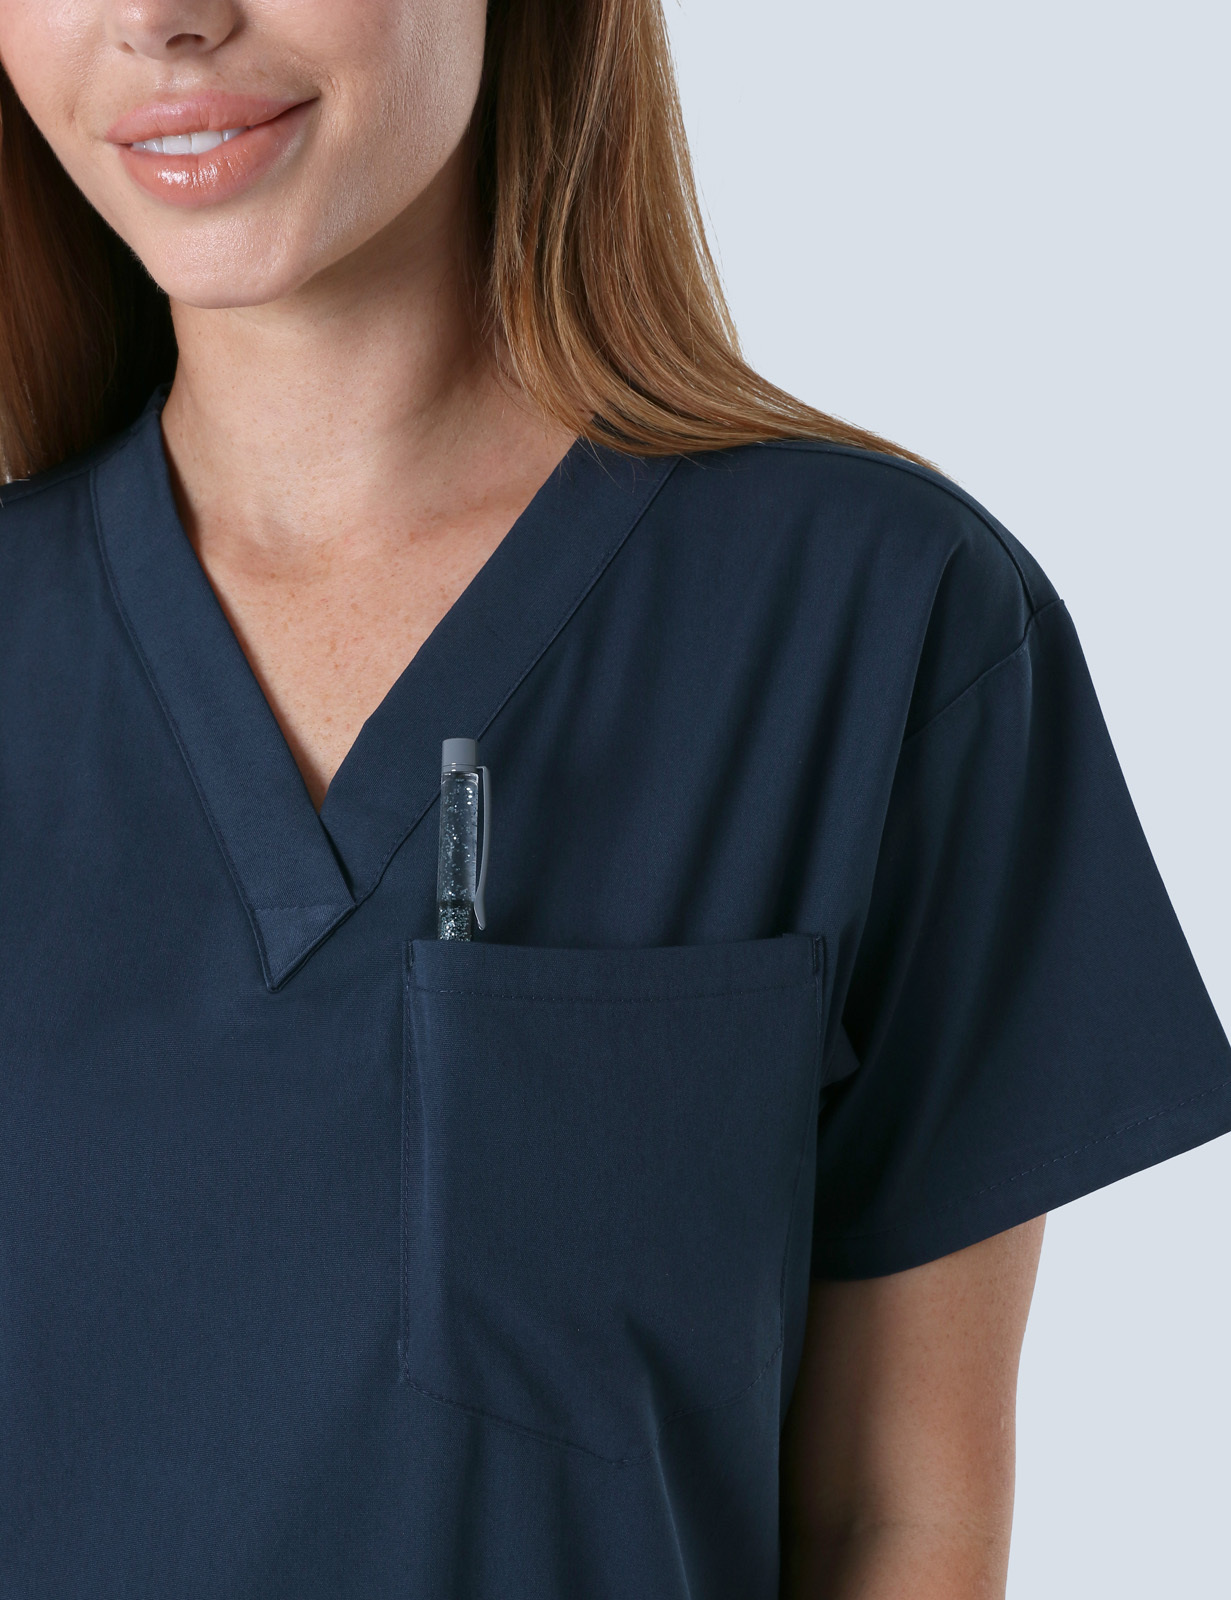 Children's Hospital Melbourne - ED (4 Pocket Scrub Top and Cargo Pants in Navy incl Logos)